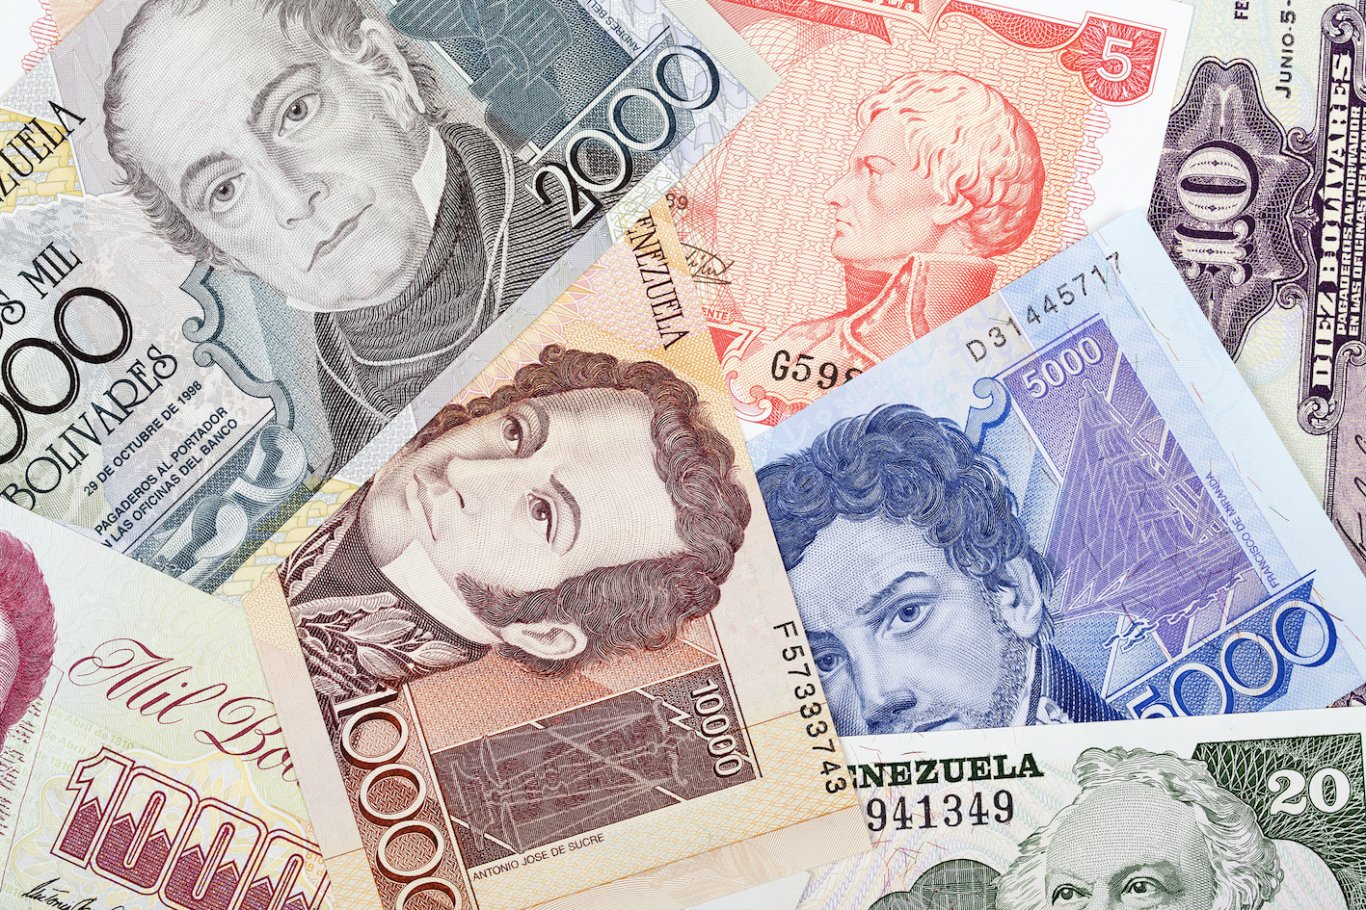 Colombia's currency